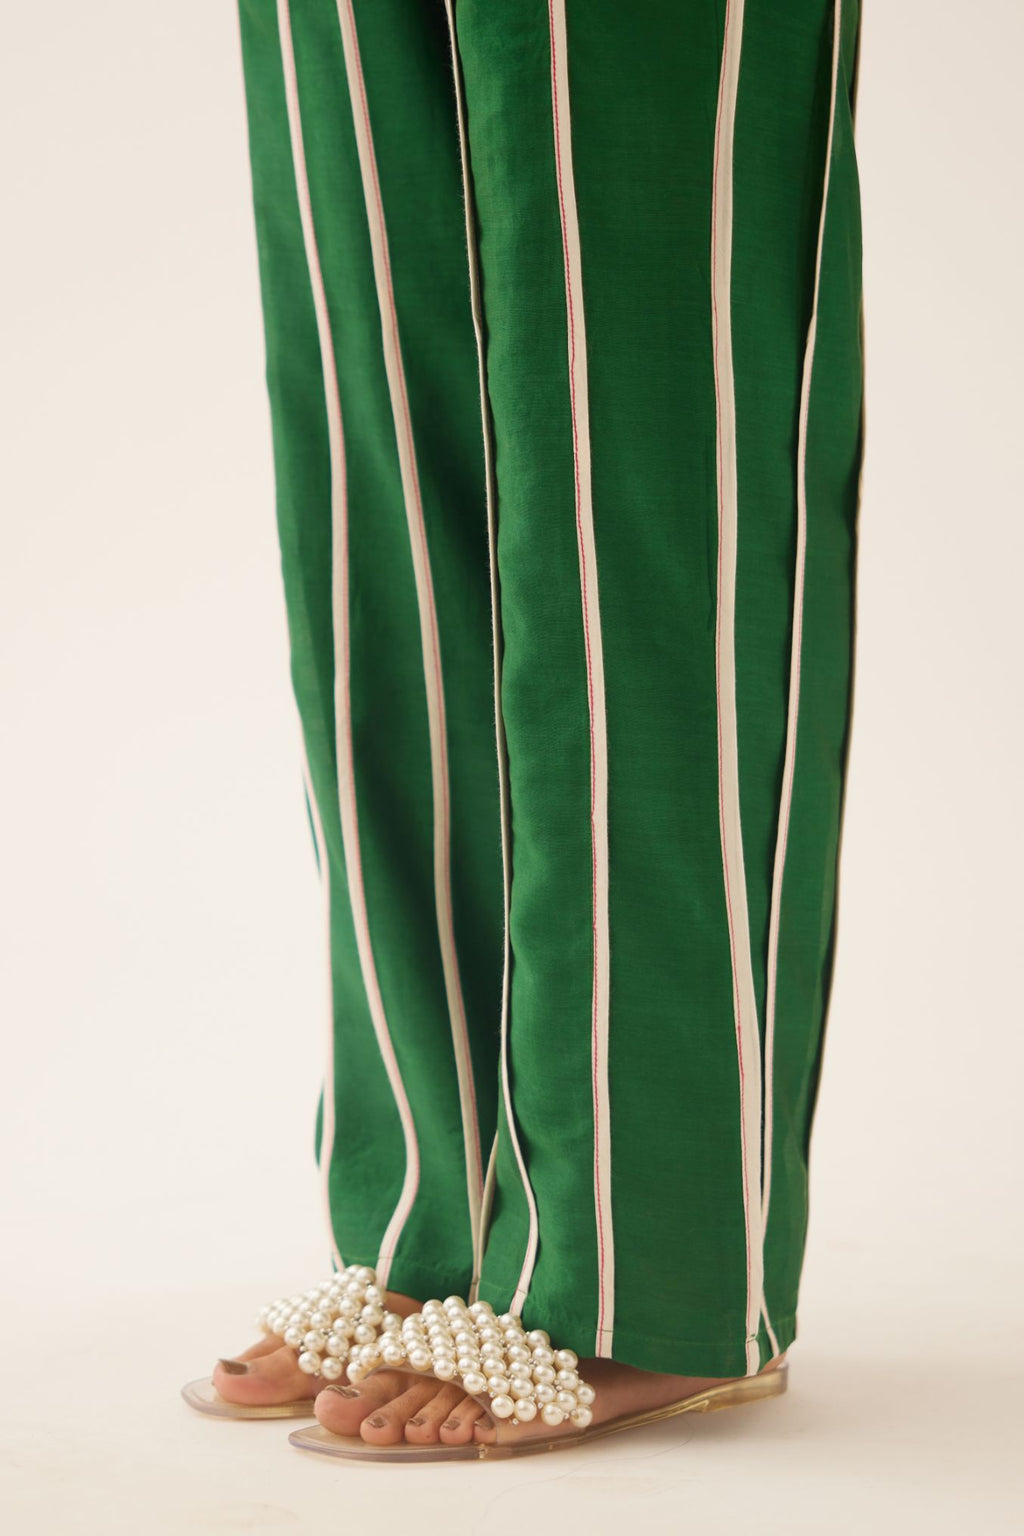 Green silk chanderi straight pants with vertical off white piping detail.